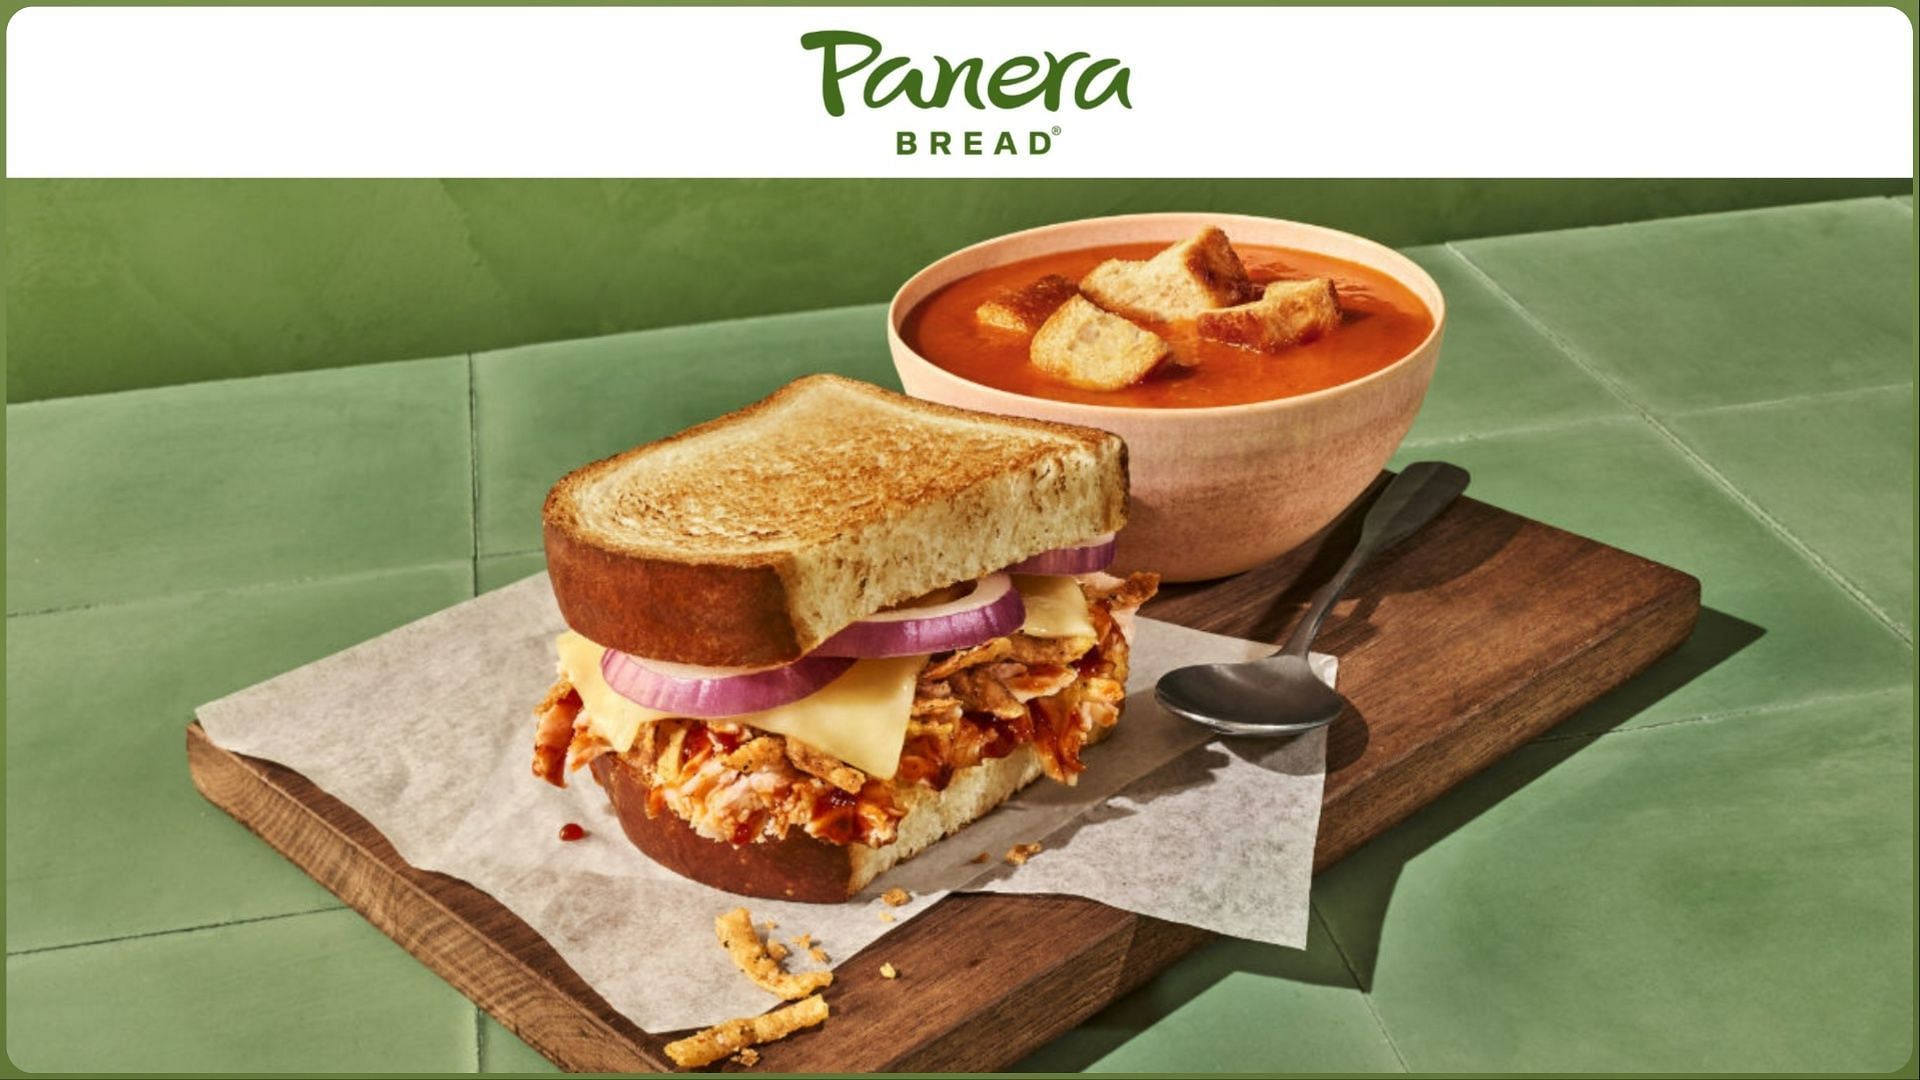 Panera Bread expands its Value Duets line-up with new offerings (Image via Panera Bread)